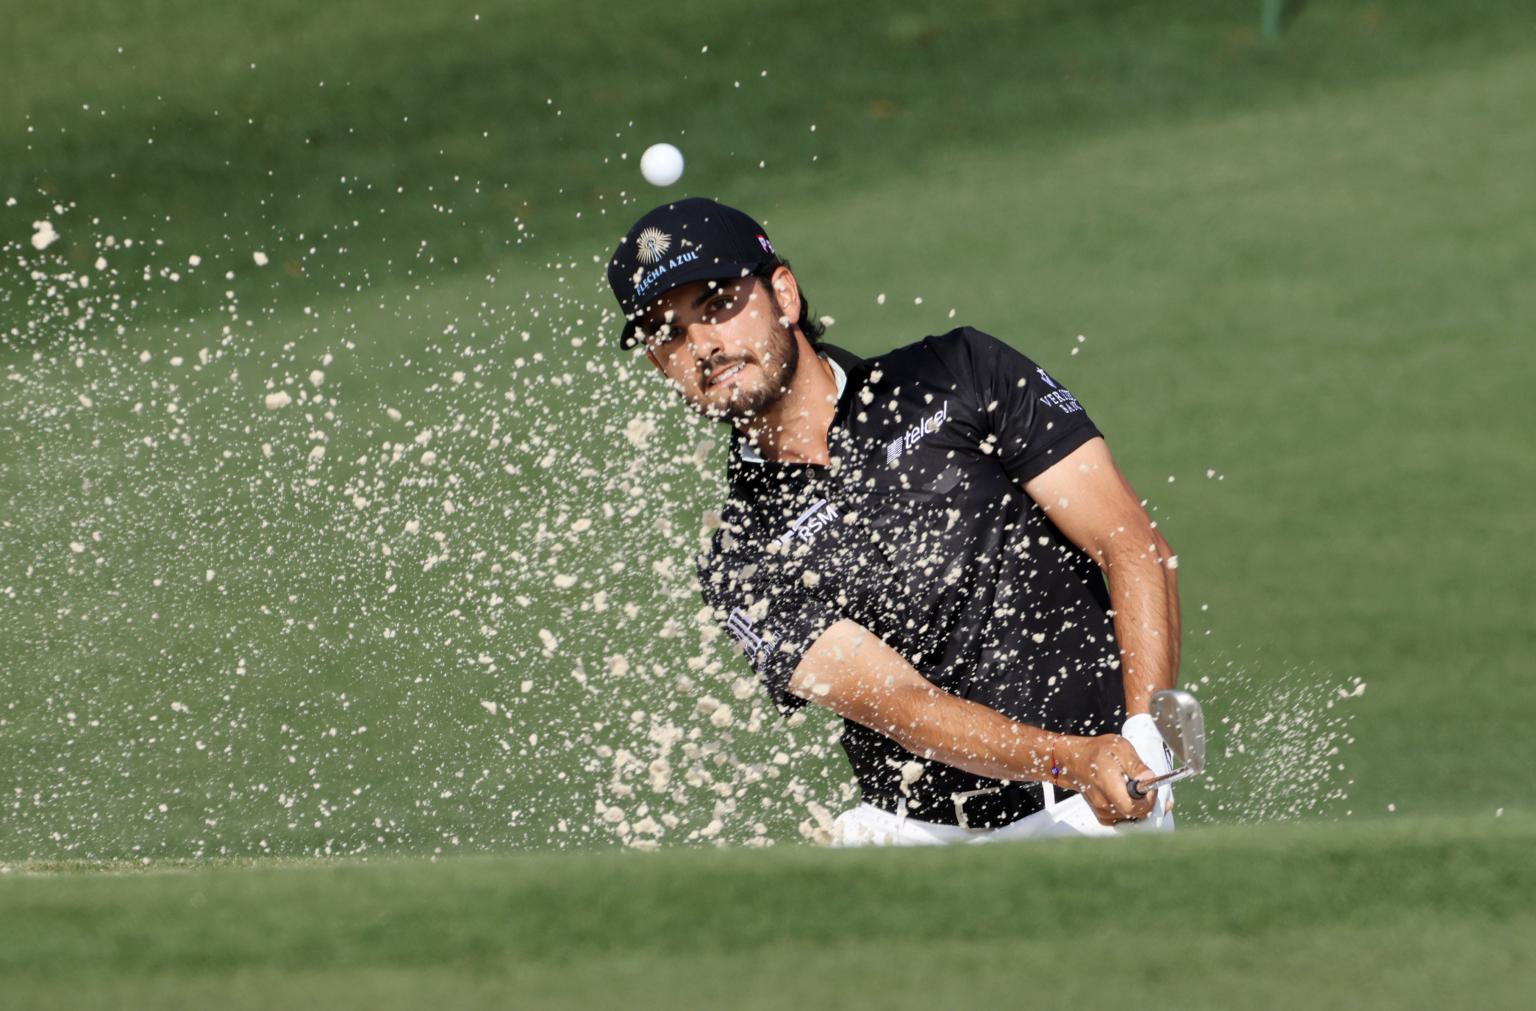 Abraham Ancer hit with "RIDICULOUS" penalty at The Masters GolfMagic